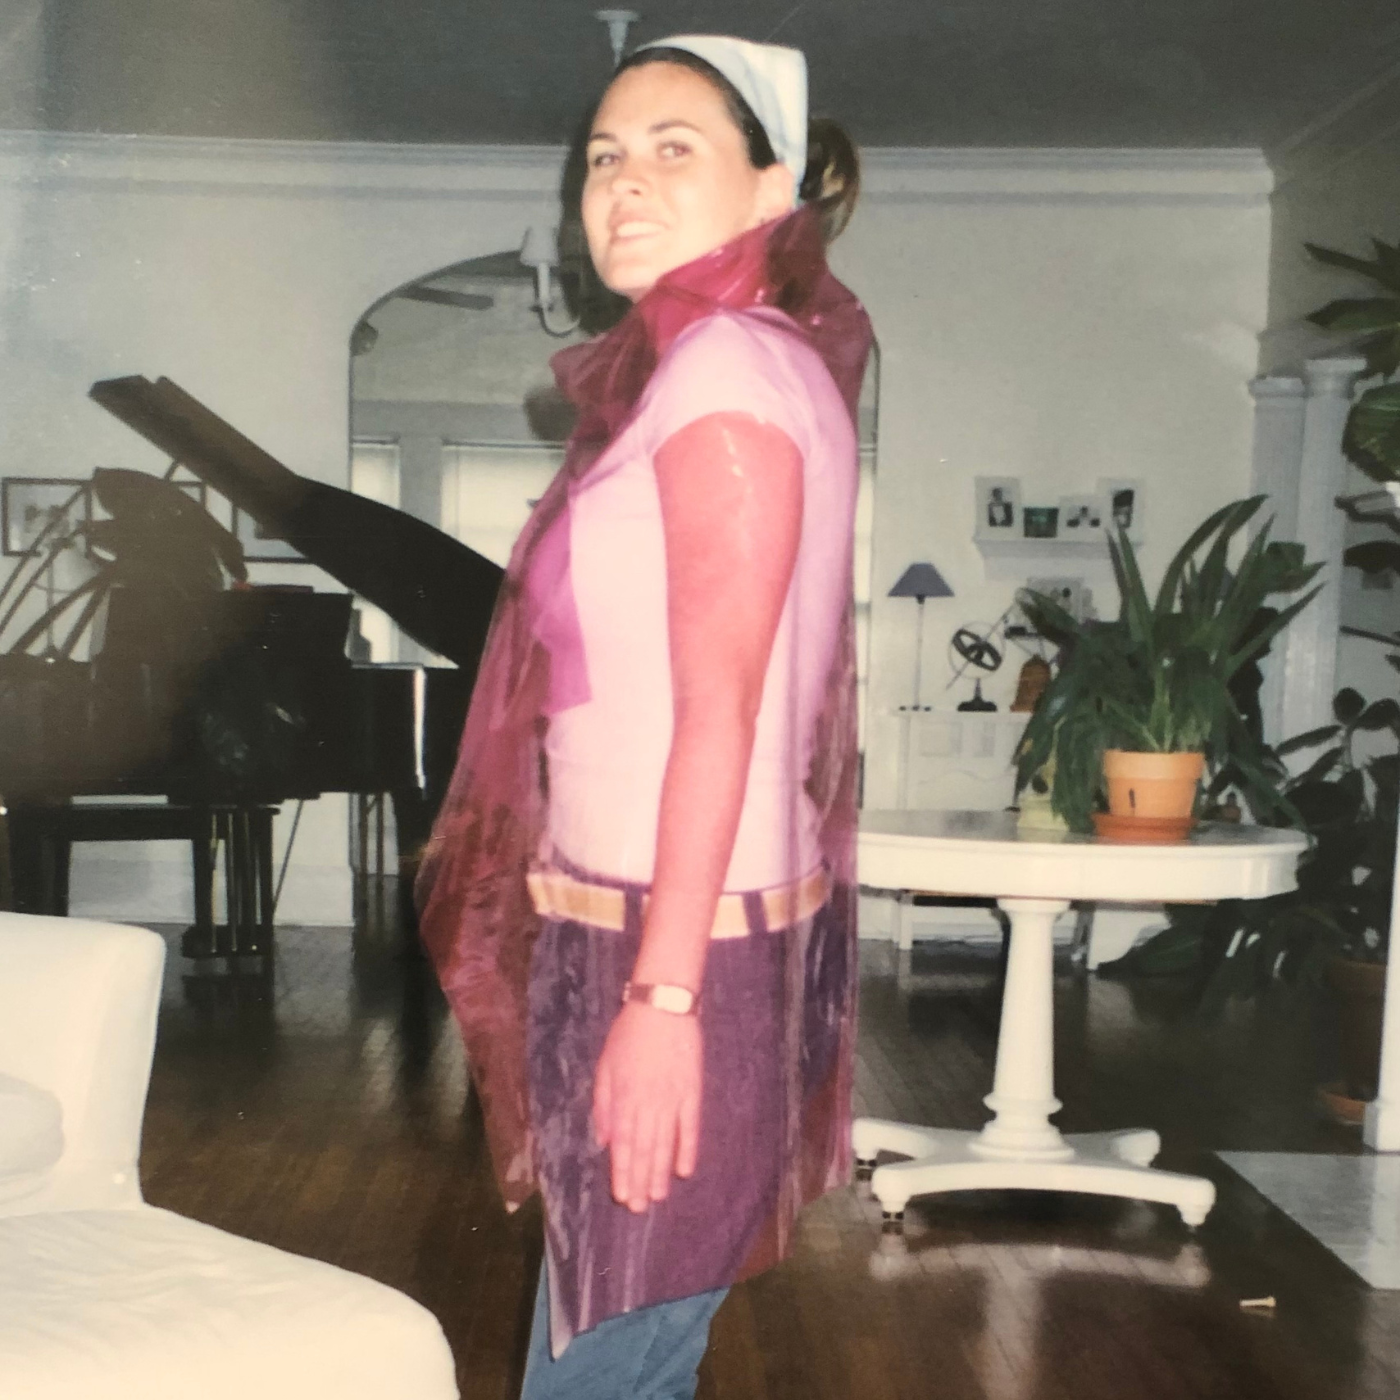 Katie Kortman stands to the side wearing a clear purple rain jacket that goes down her thighs and has a high neck. A white short-sleeved shirt, cream belt and blue pants can be seen underneath. Katie is wearing a white bandana in her hair and standing in a living room, with a black piano to her left and a white table with a potted plant on it to her right.